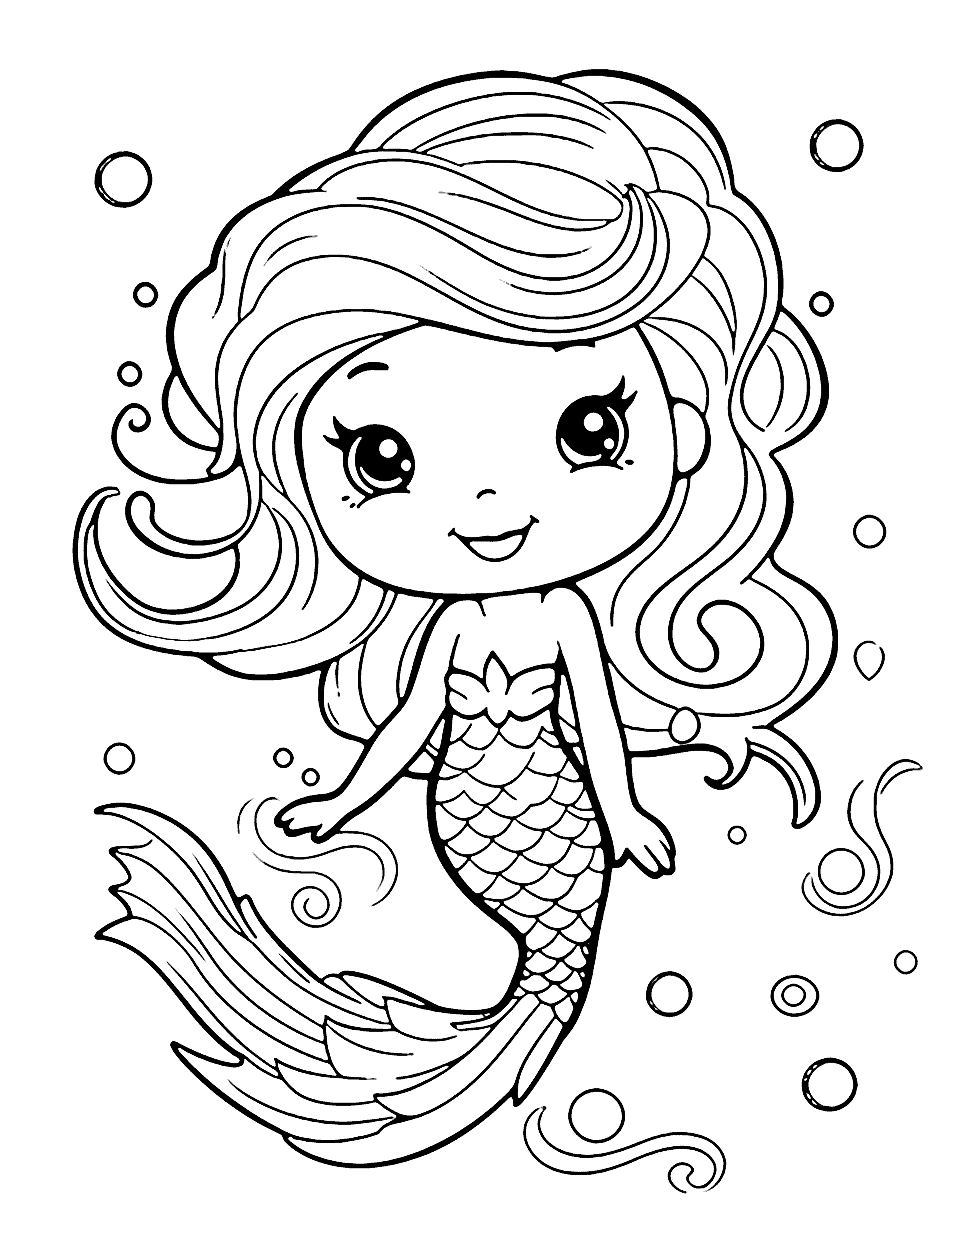 Chibi Mermaid Underwater Cute Coloring Page - A small cute mermaid with colorful scales swimming in an underwater world.